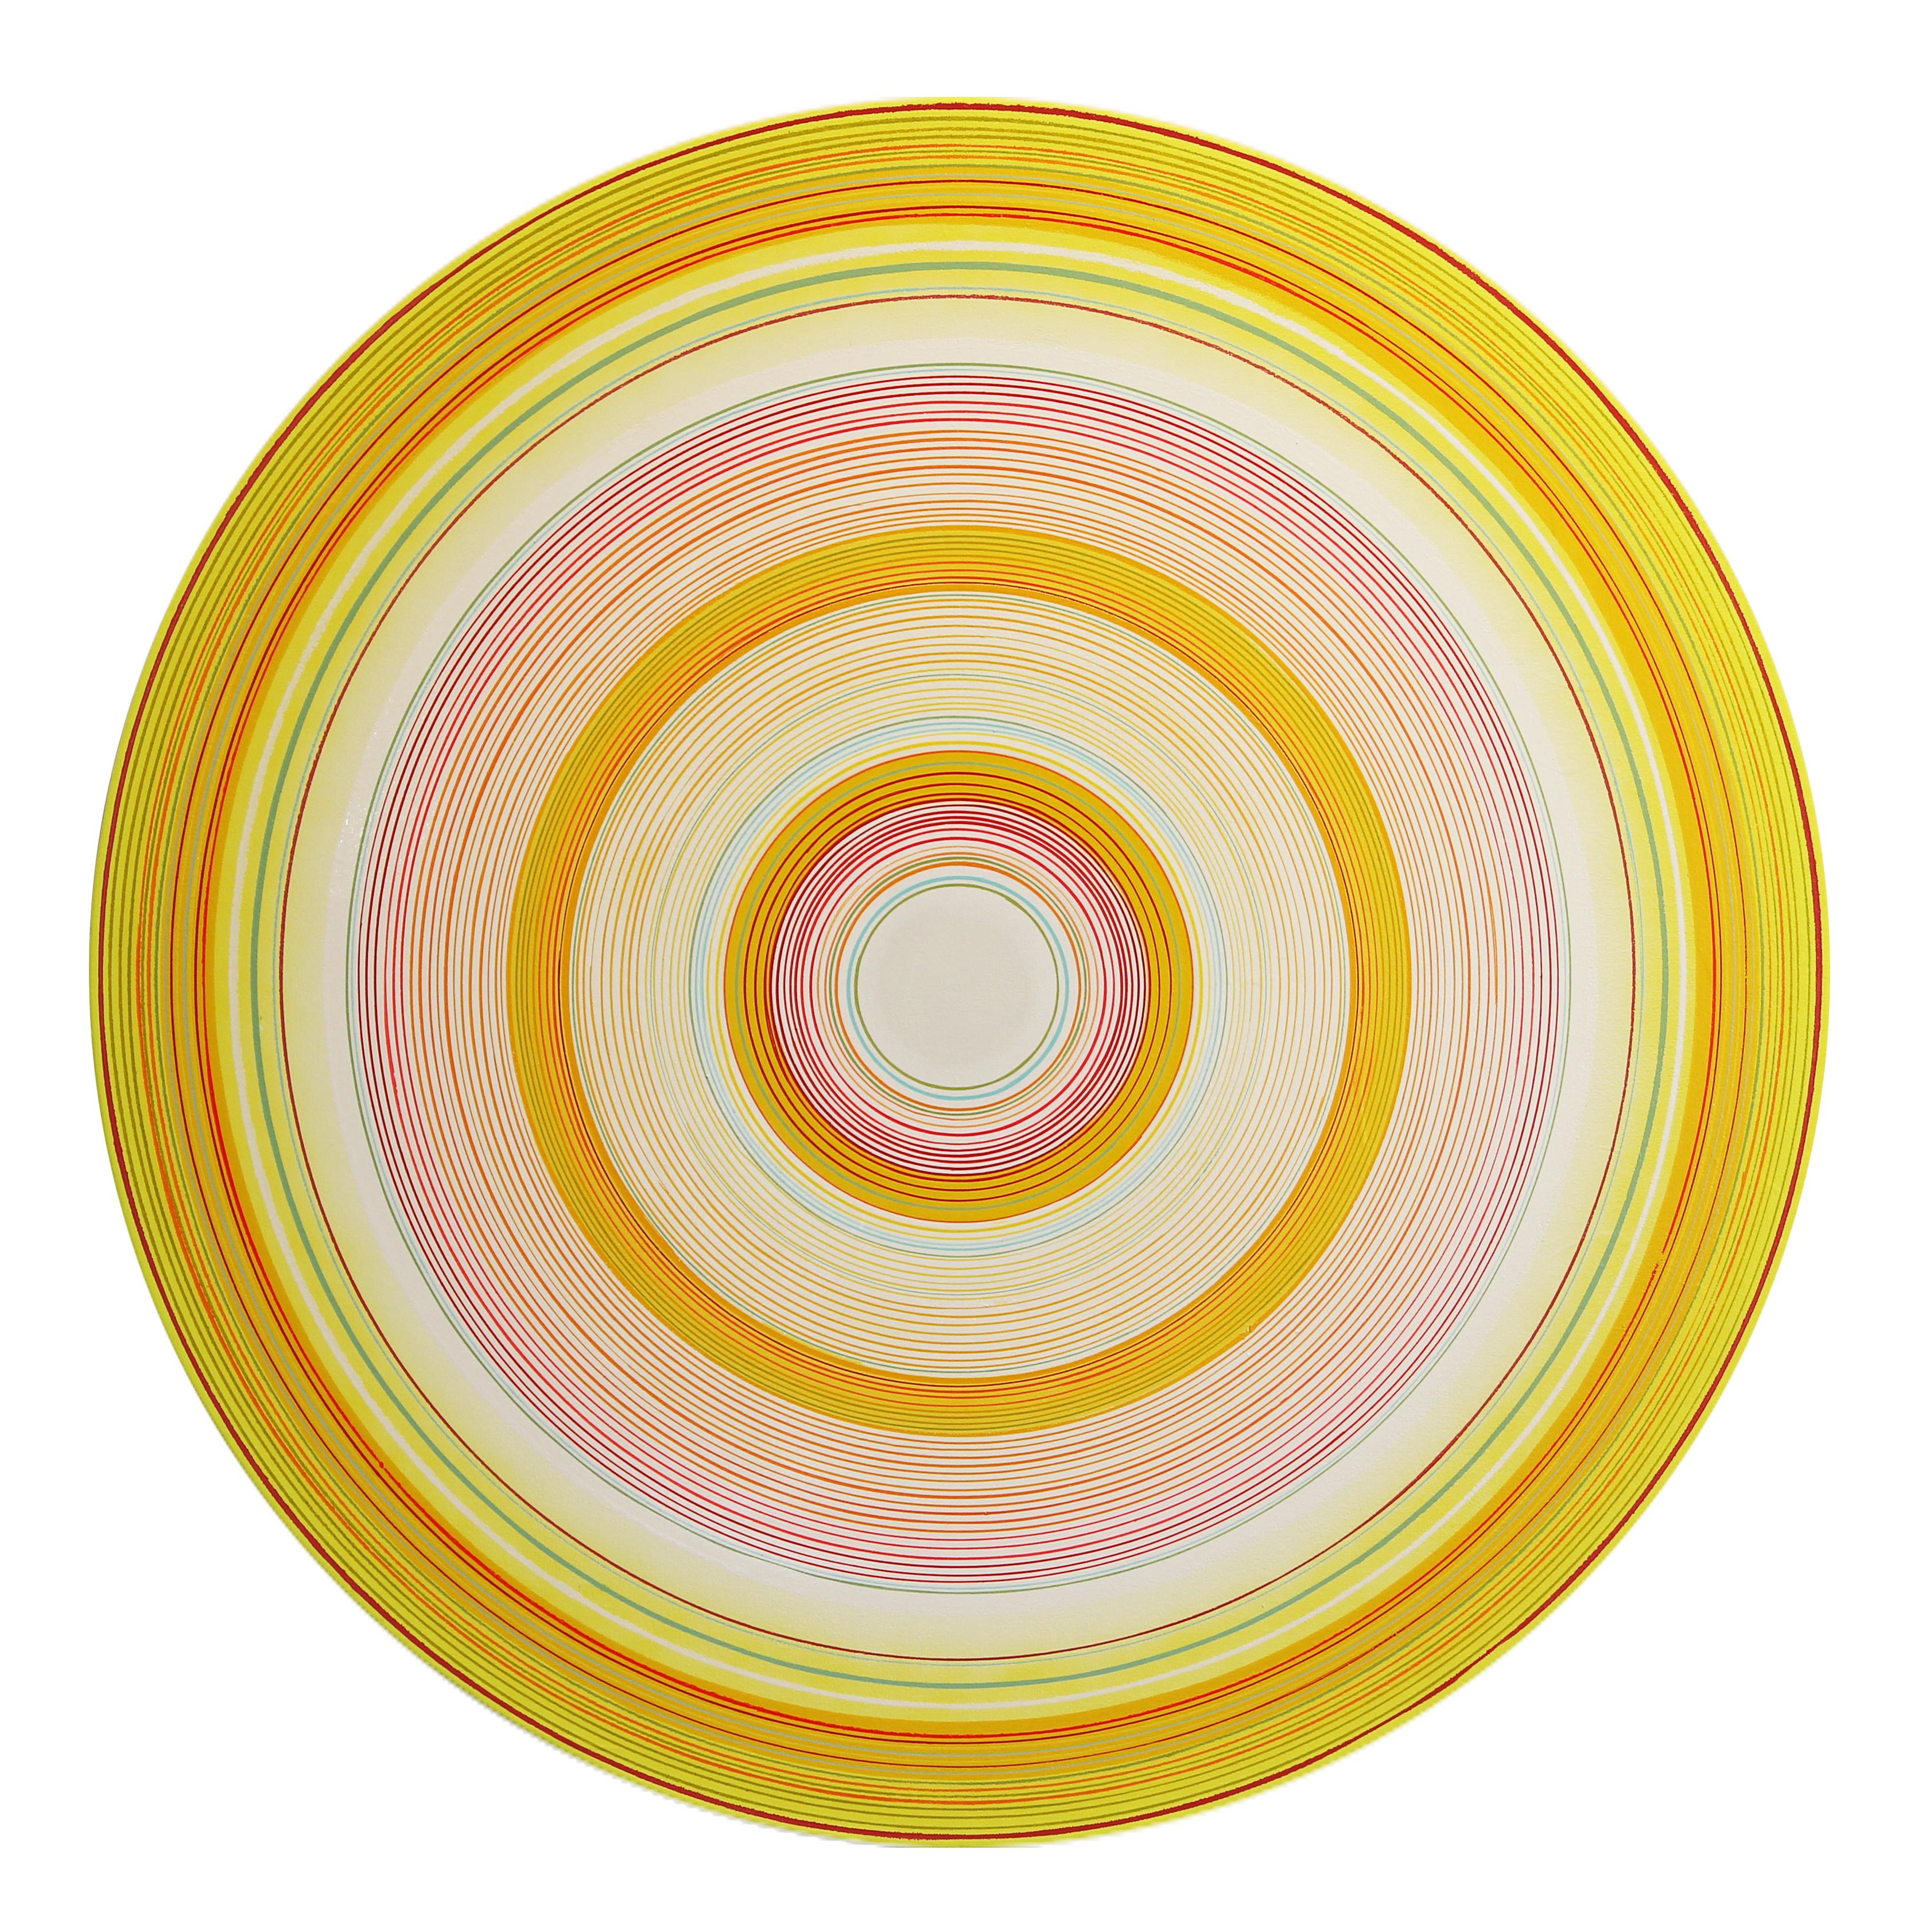 David Hardaker Abstract Painting - "Summer on my Mind" Yellow, Light Pink, and Orange Painting